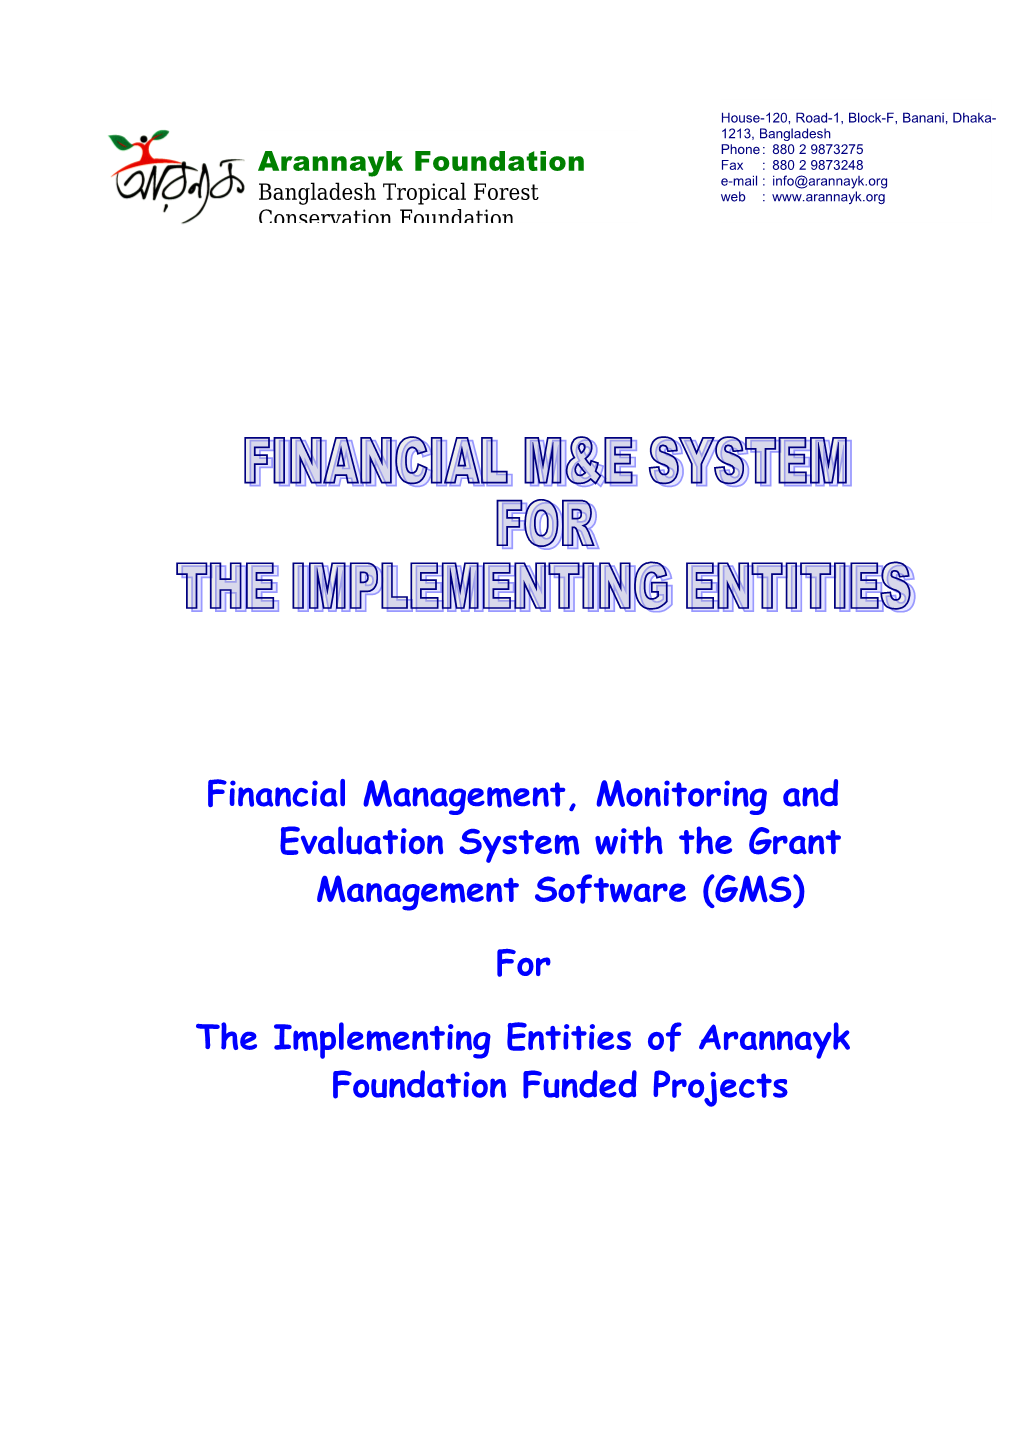 The Implementing Entities of Arannayk Foundation Funded Projects